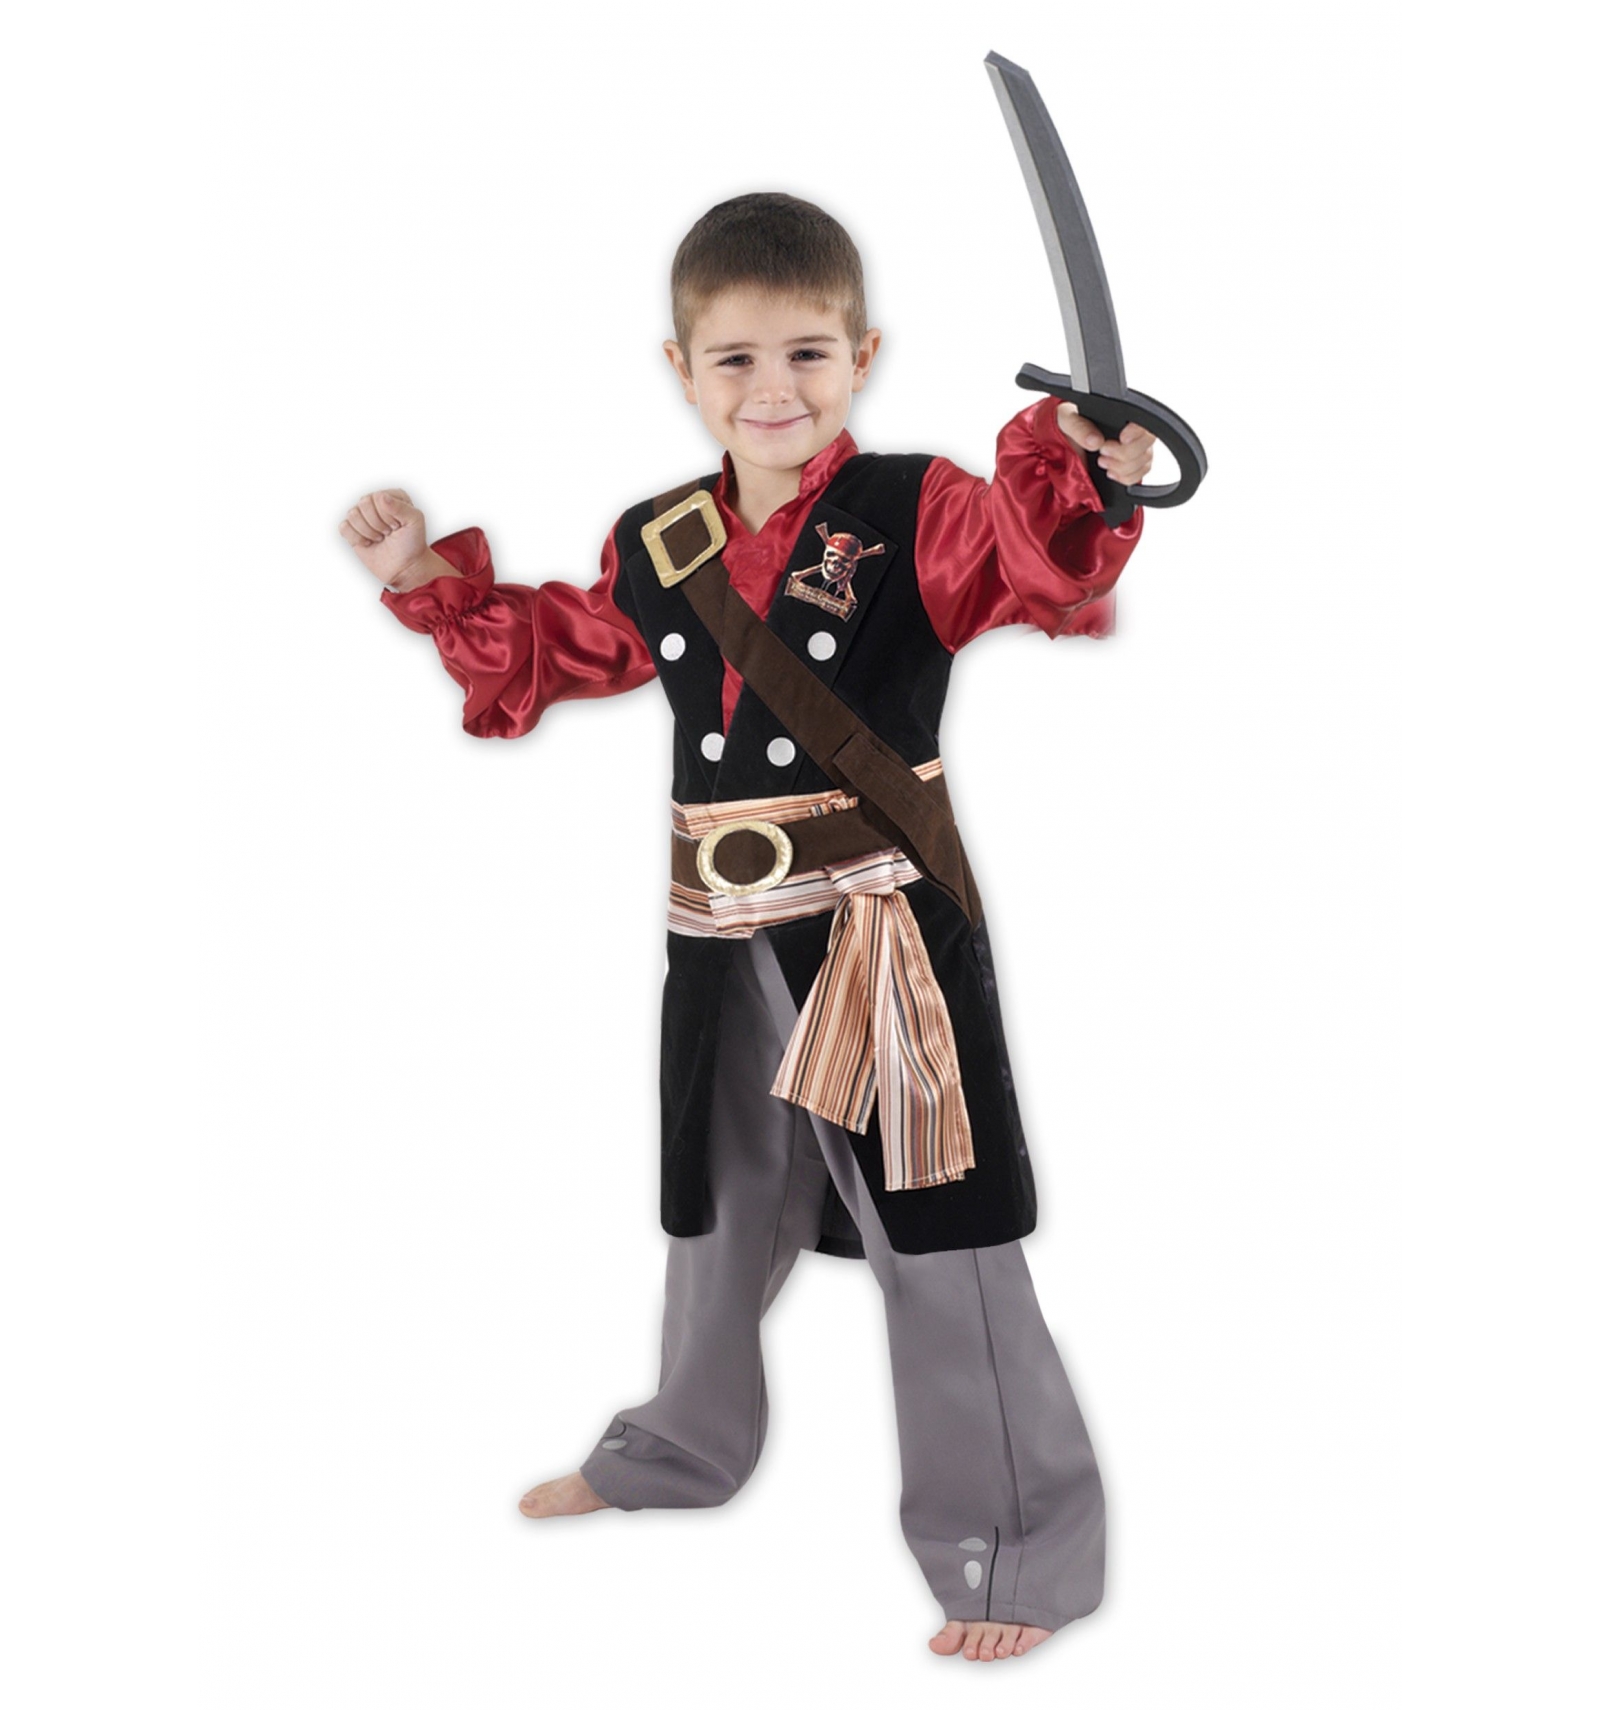 Will Turner kids costume - Your Online Costume Store